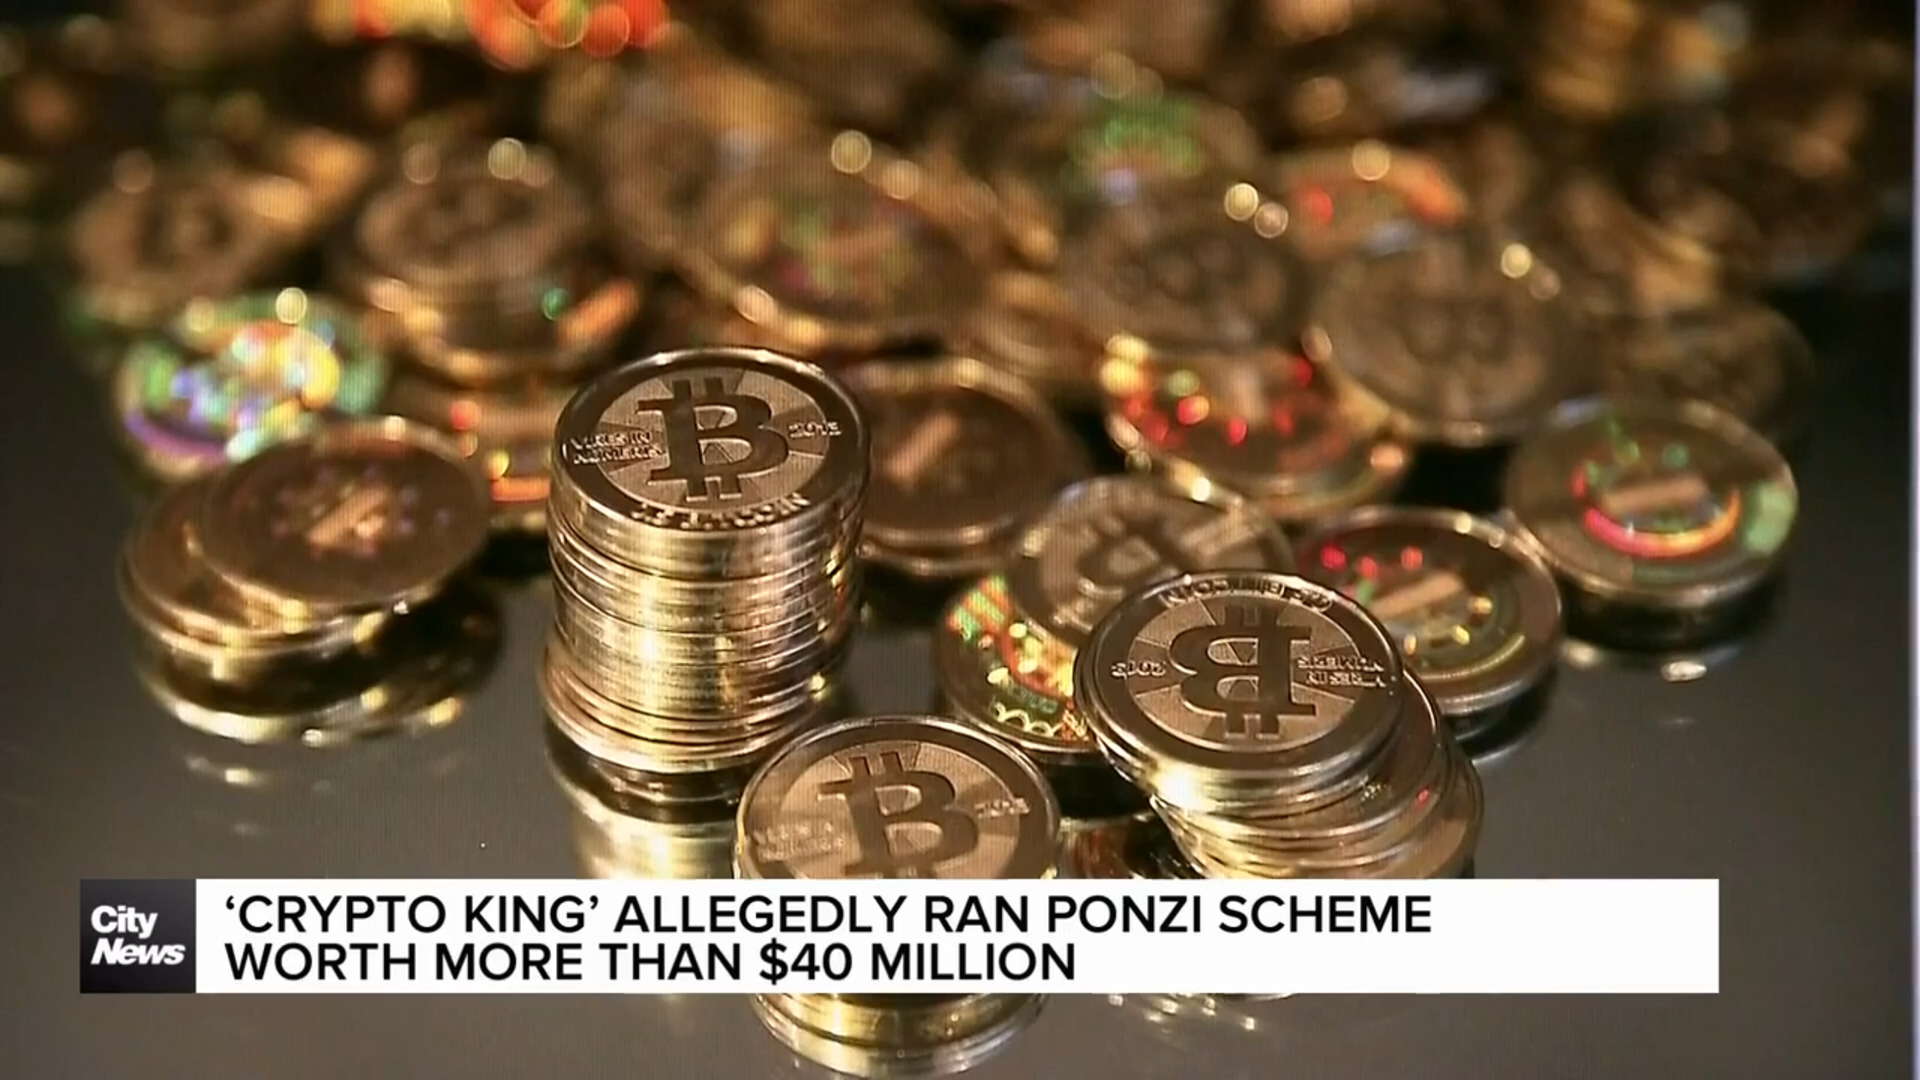 ‘Crypto King’ could face 14 years behind bars